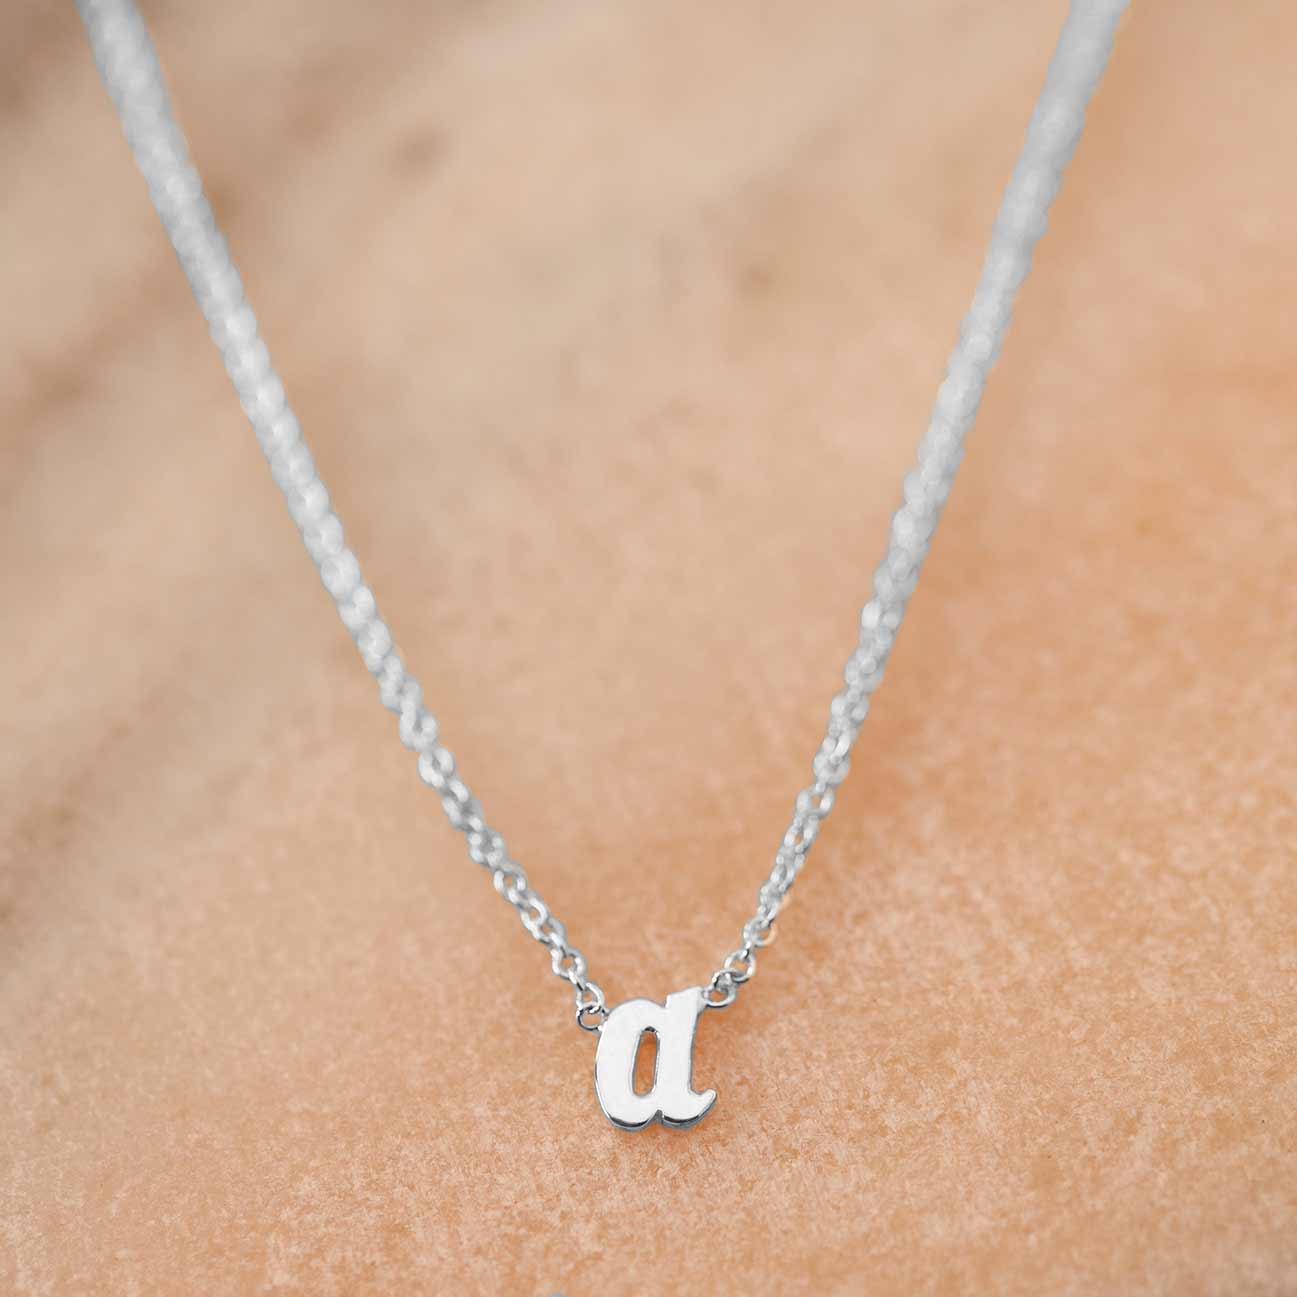 Gold Plated Letter J Initial & Pearl Pendant Necklace - Lovisa